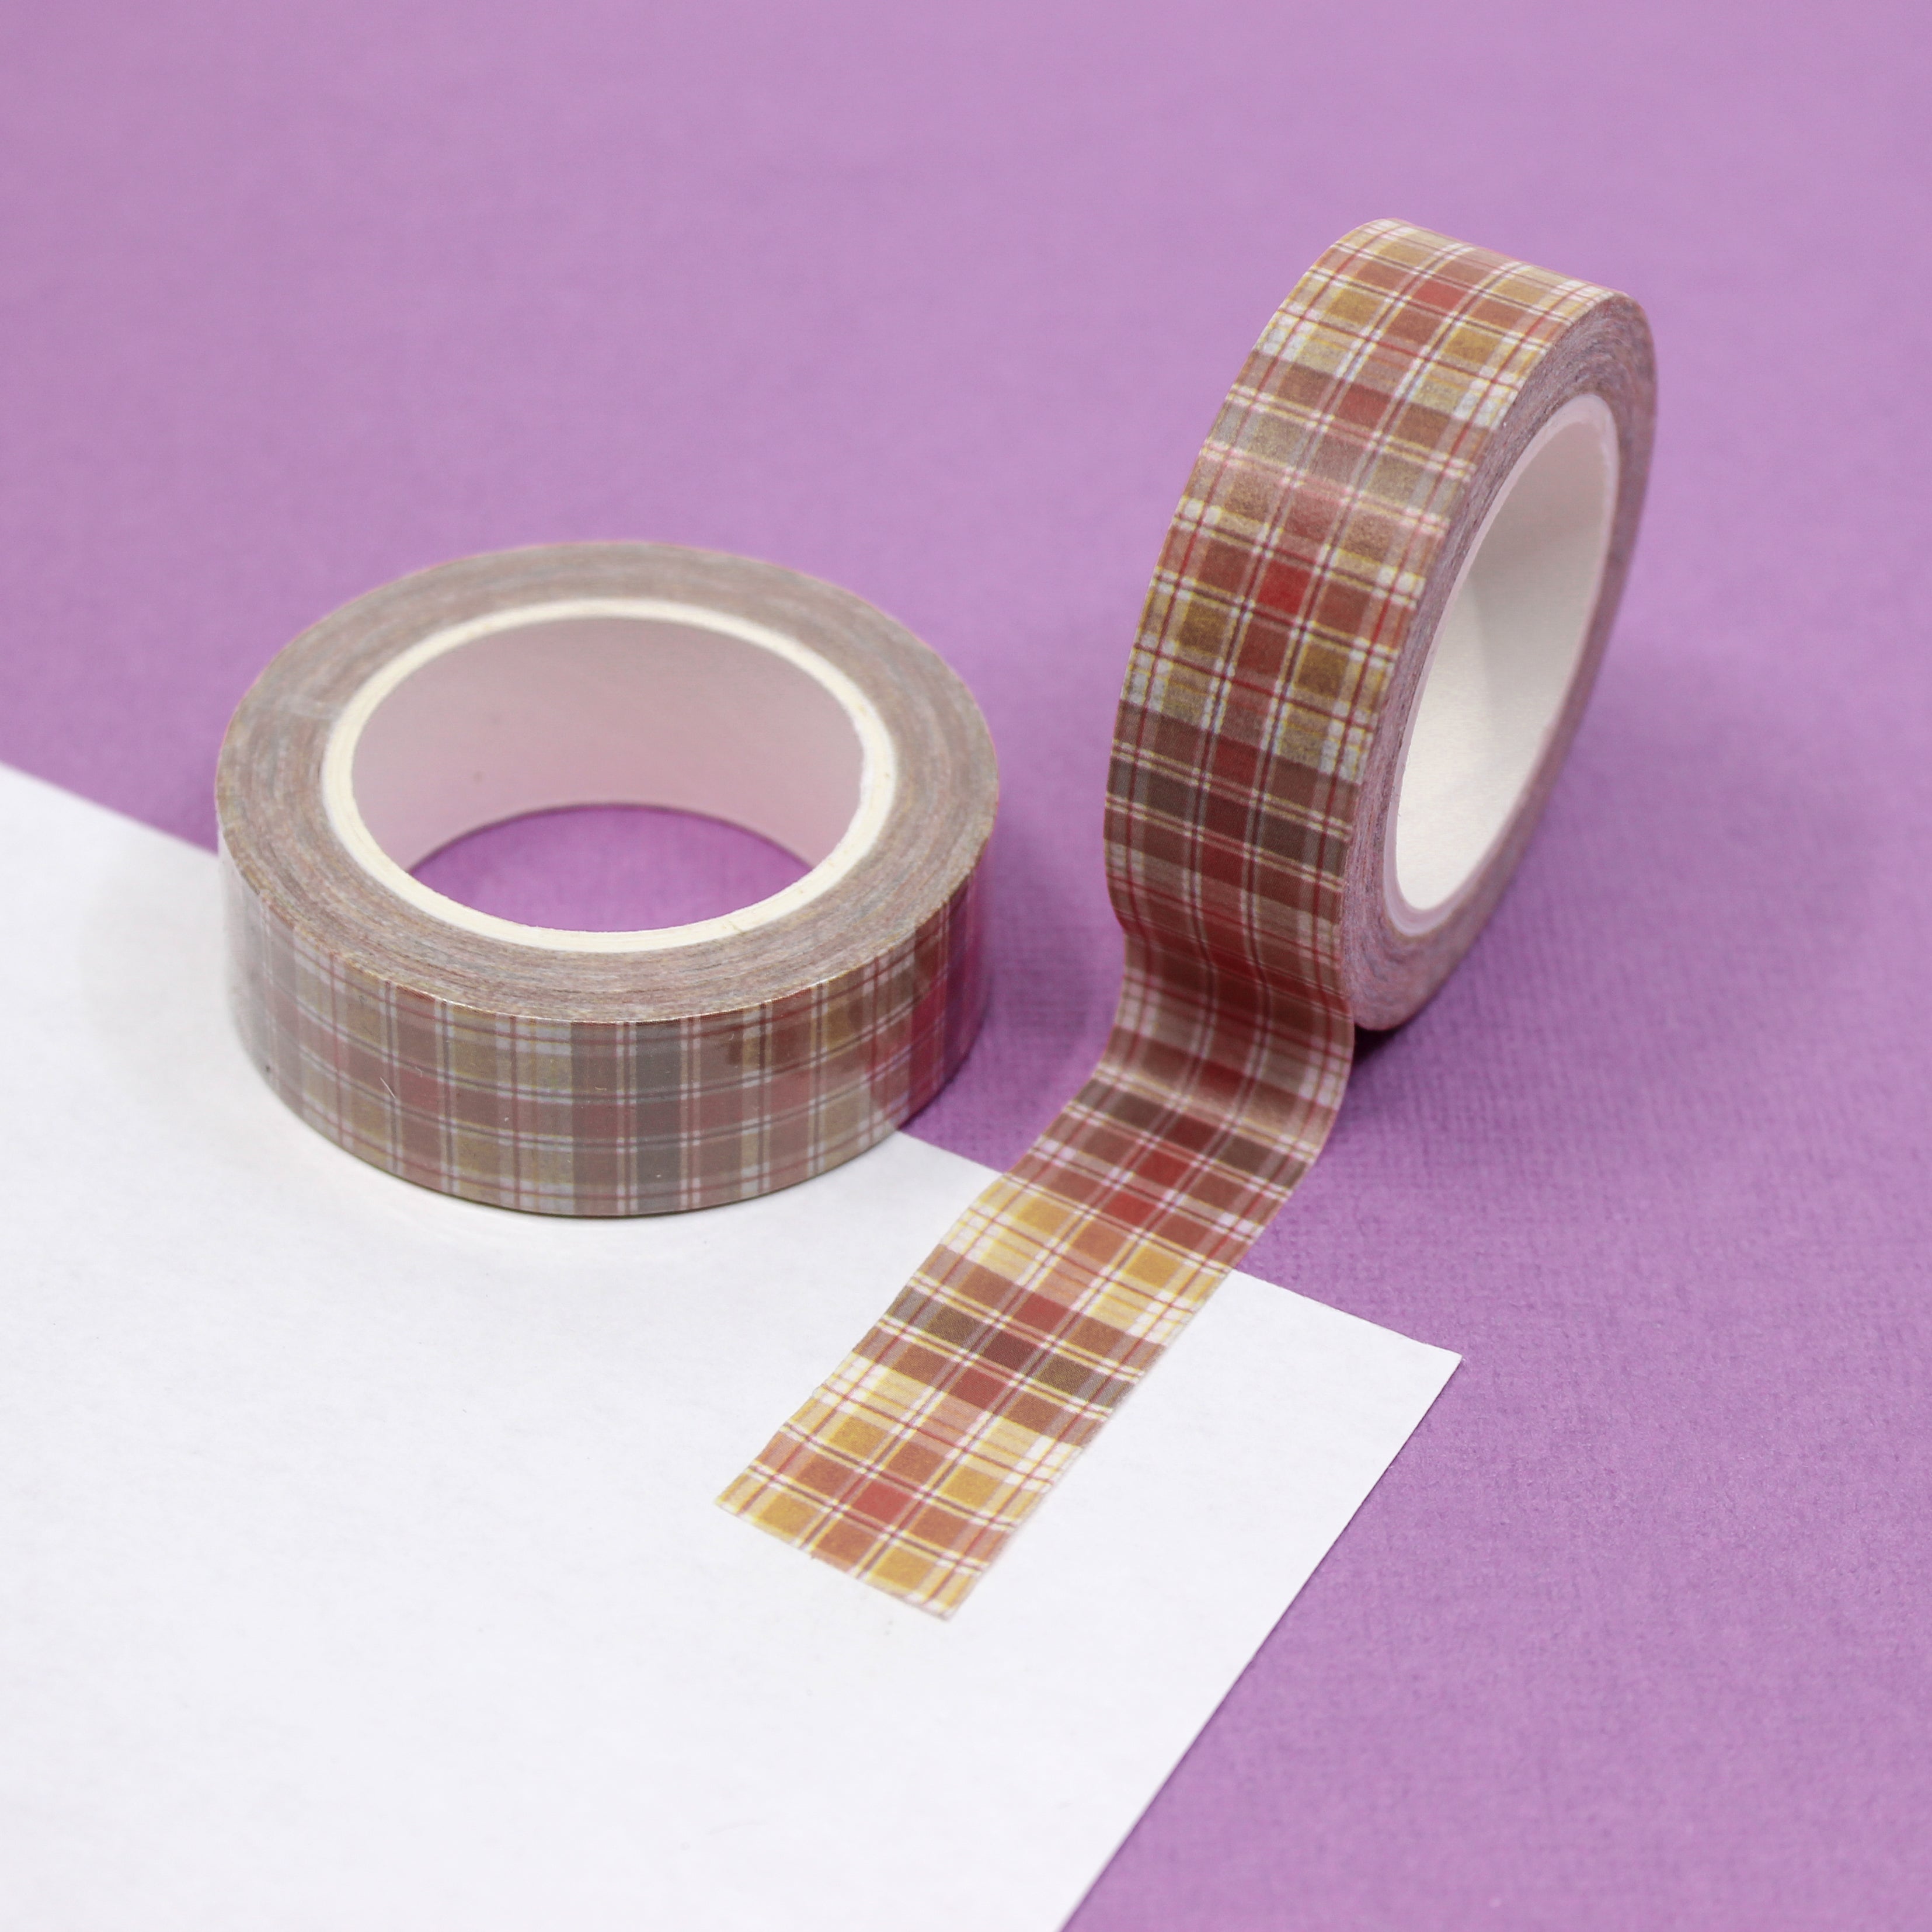  Yellow Spring Plaid Washi Tape: Brighten up your spring crafts with our Yellow Spring Plaid Washi Tape. This tape features a charming plaid pattern in cheerful yellow tones, perfect for adding a touch of sunshine to your projects. Use it to decorate cards, scrapbook pages, or gift wrap, and bring a pop of color to your springtime creations.